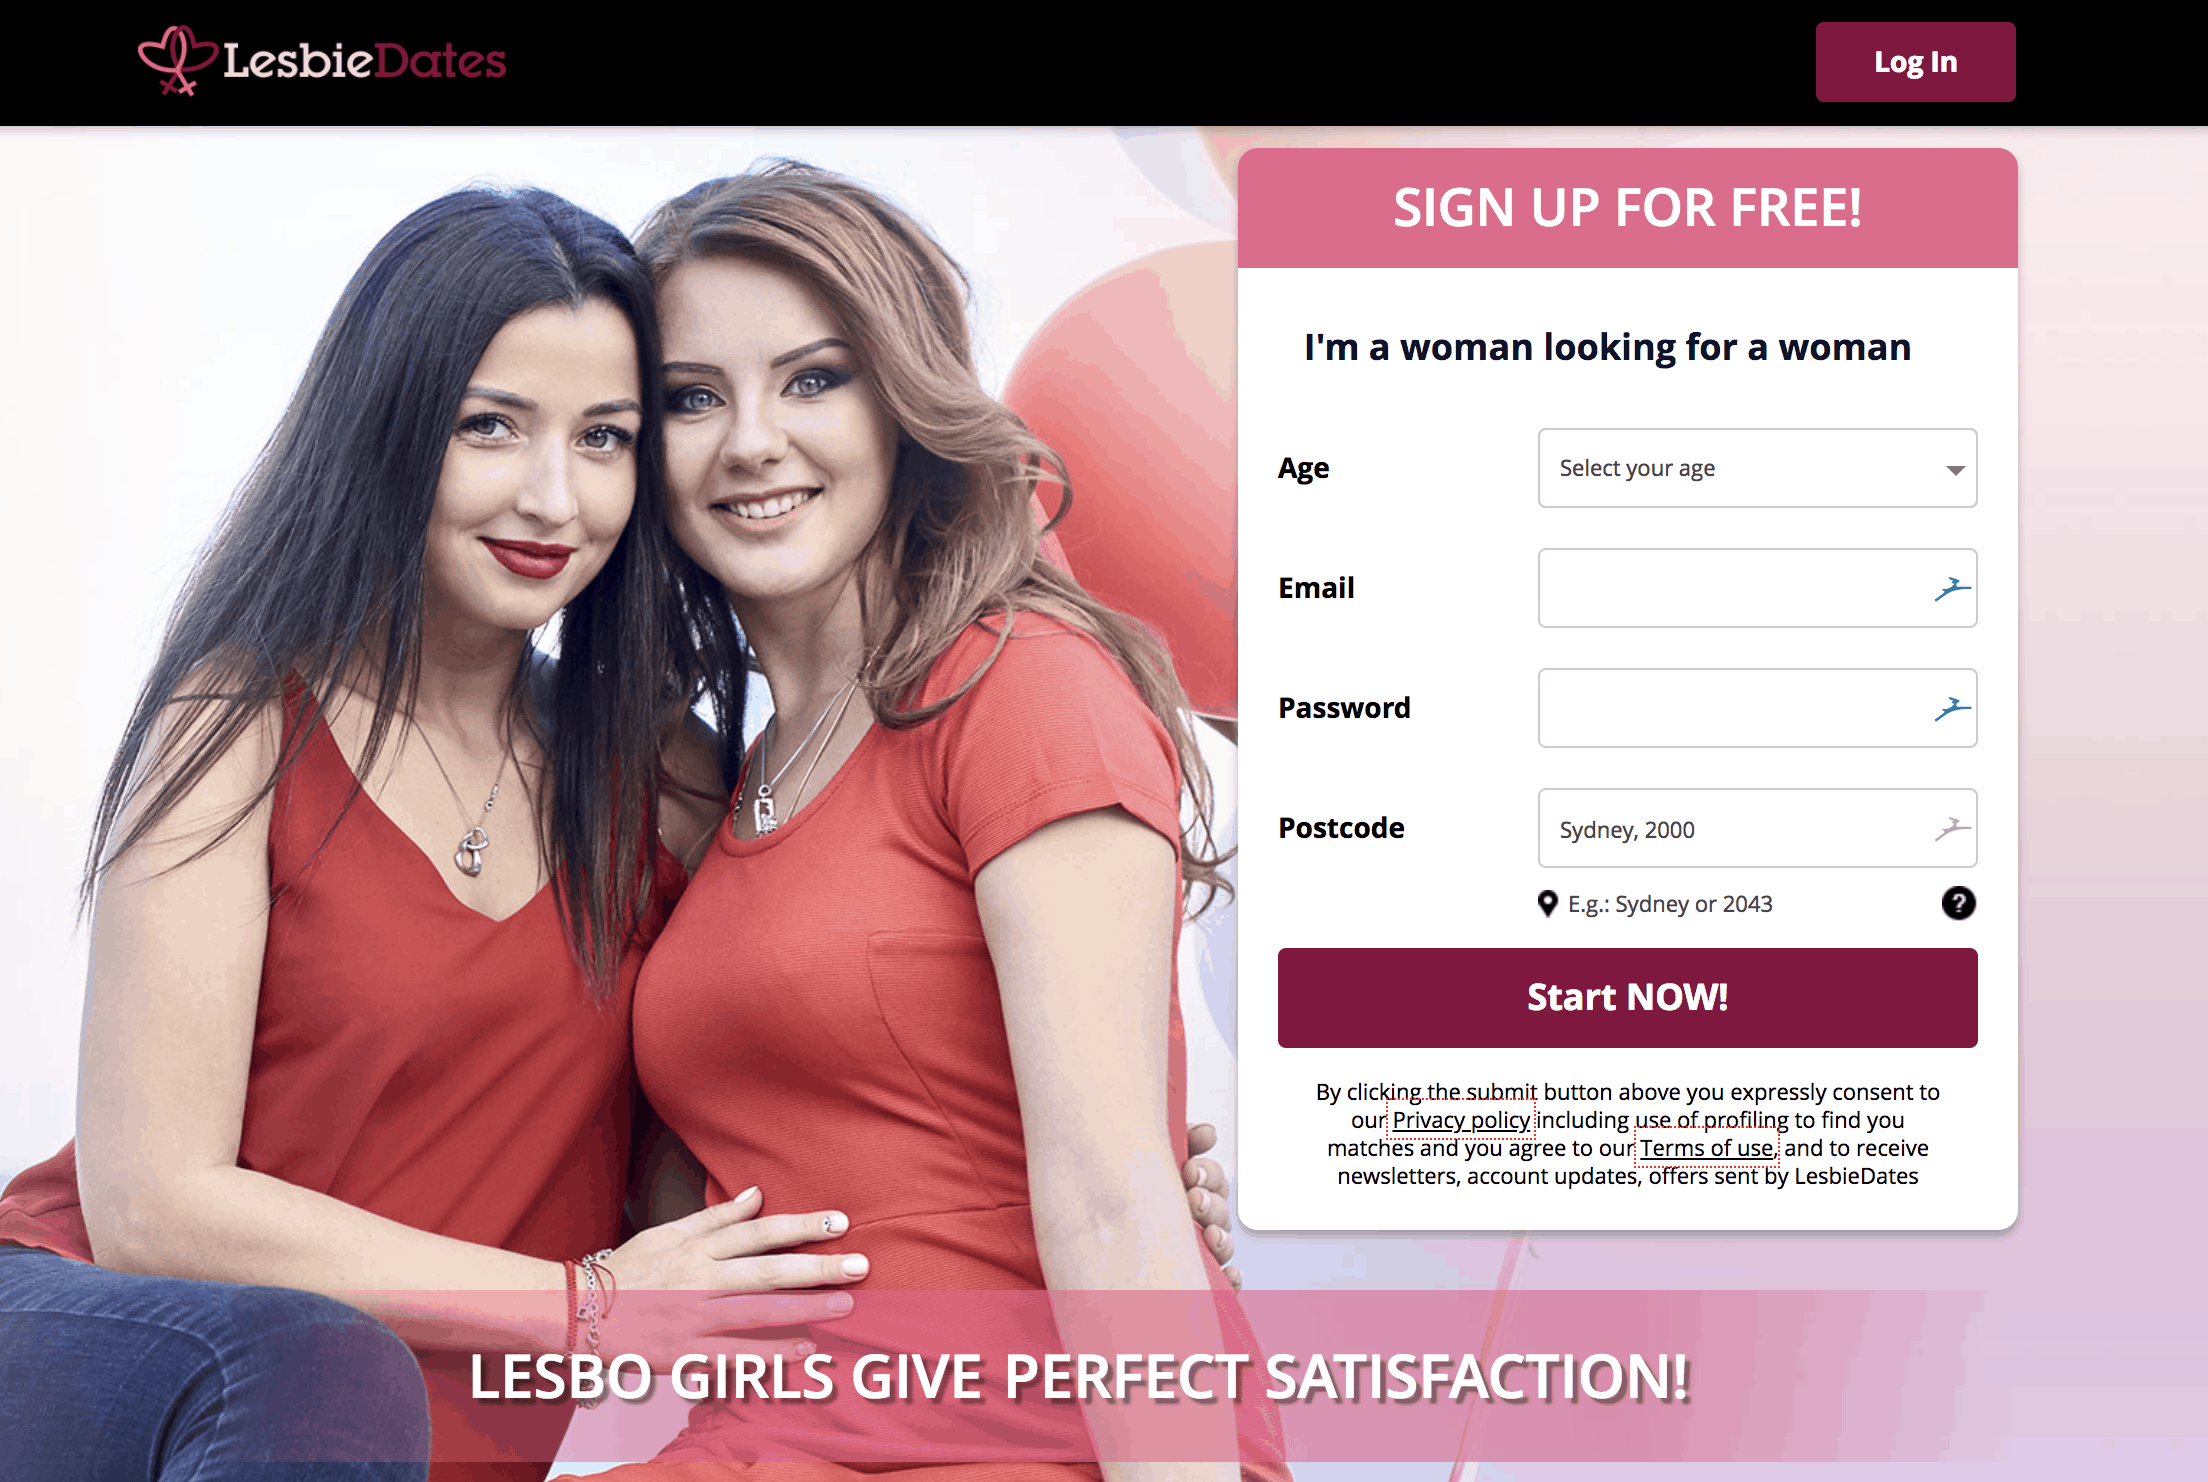 Lesbian dating website in Chicago